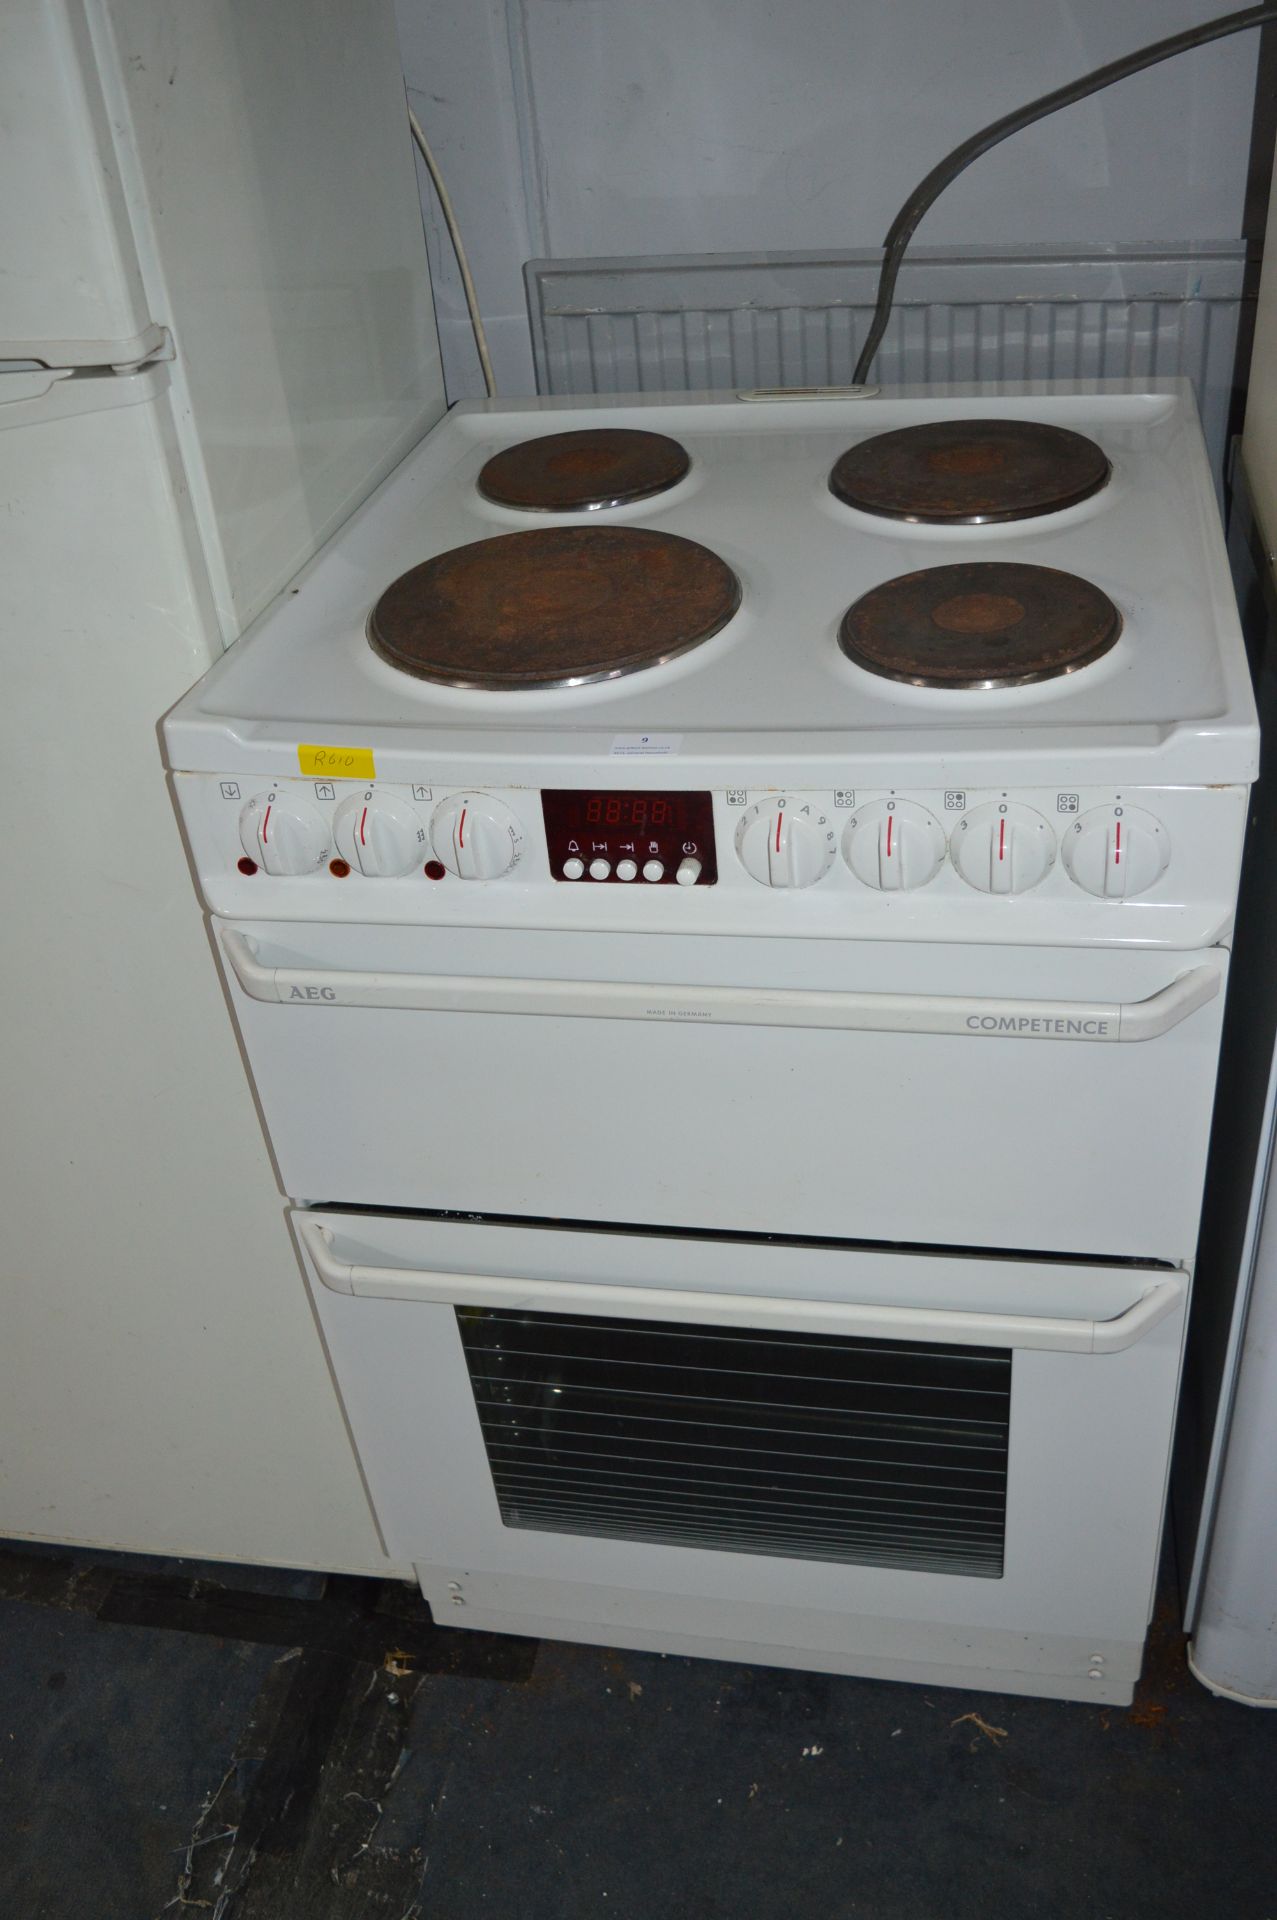 AEG Competence Electric Oven